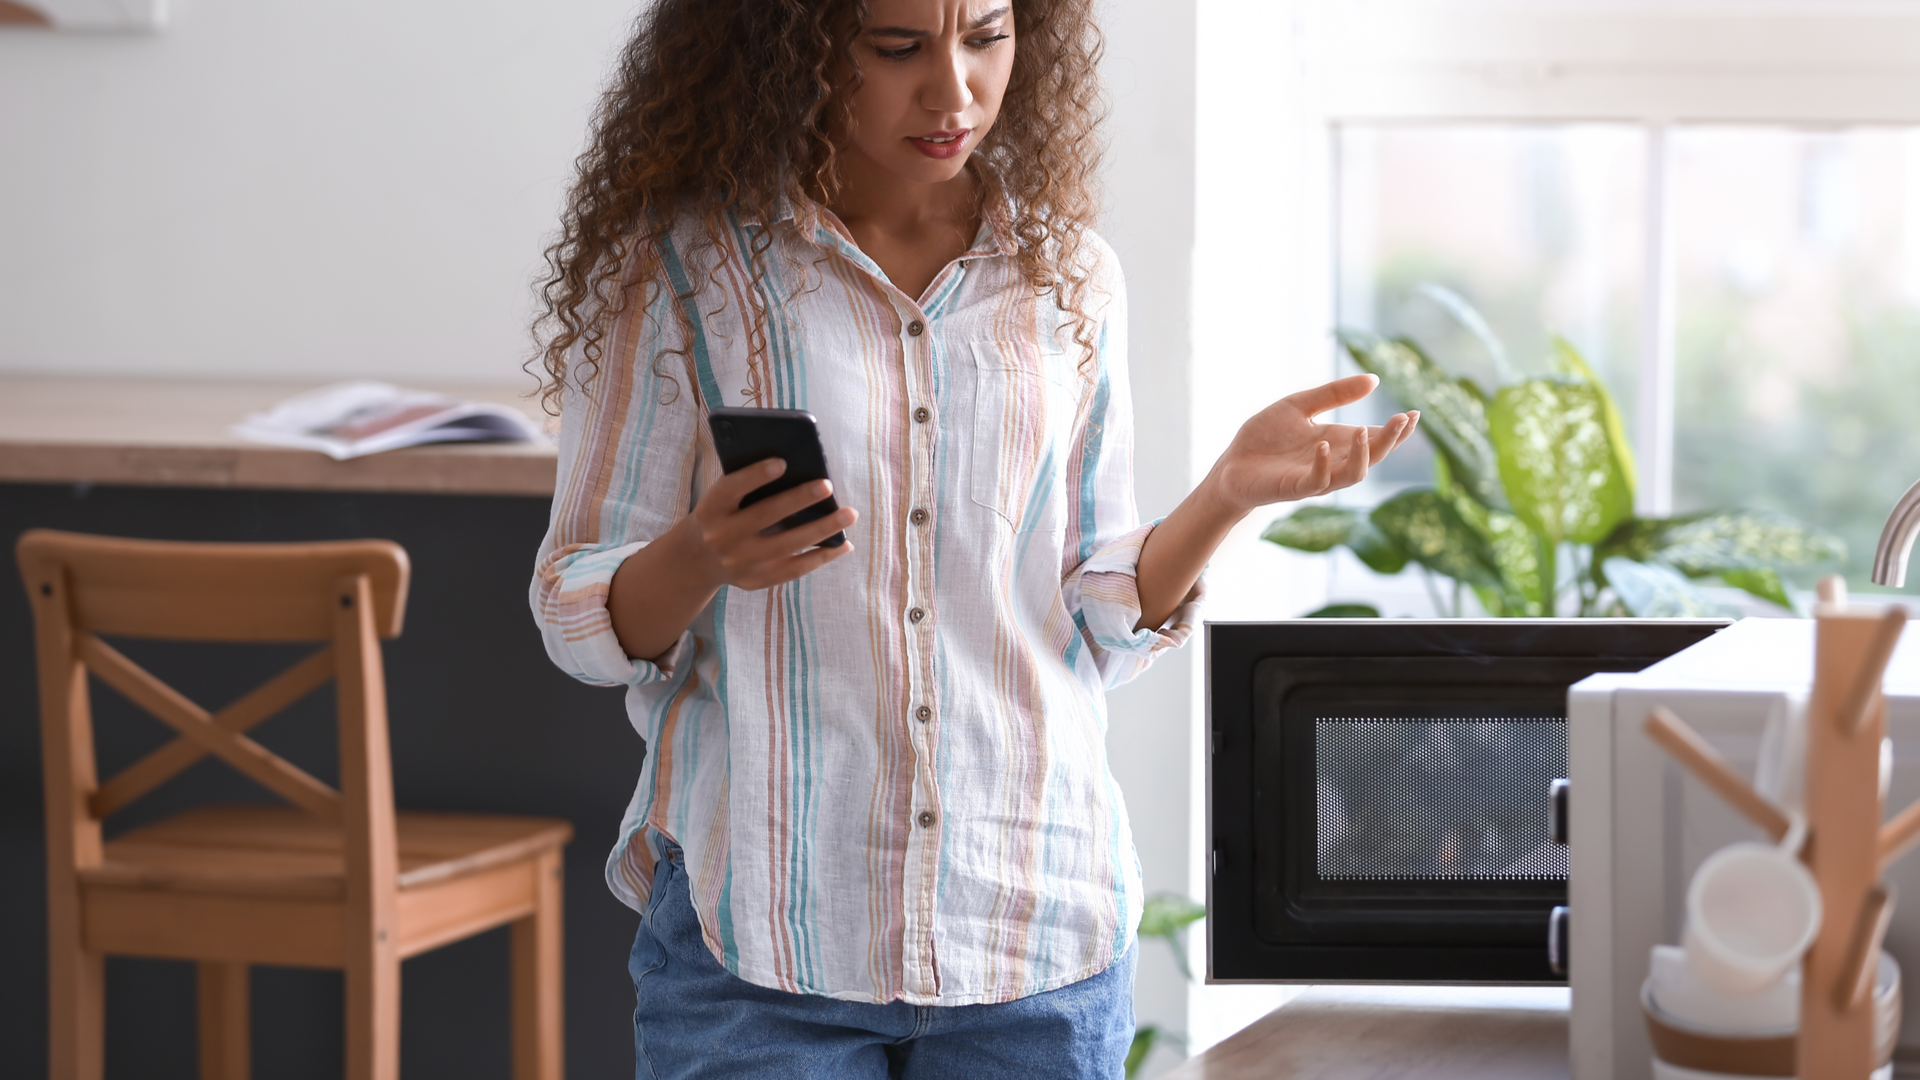 Upset person holding mobile phone near open microwave in modern kitchen